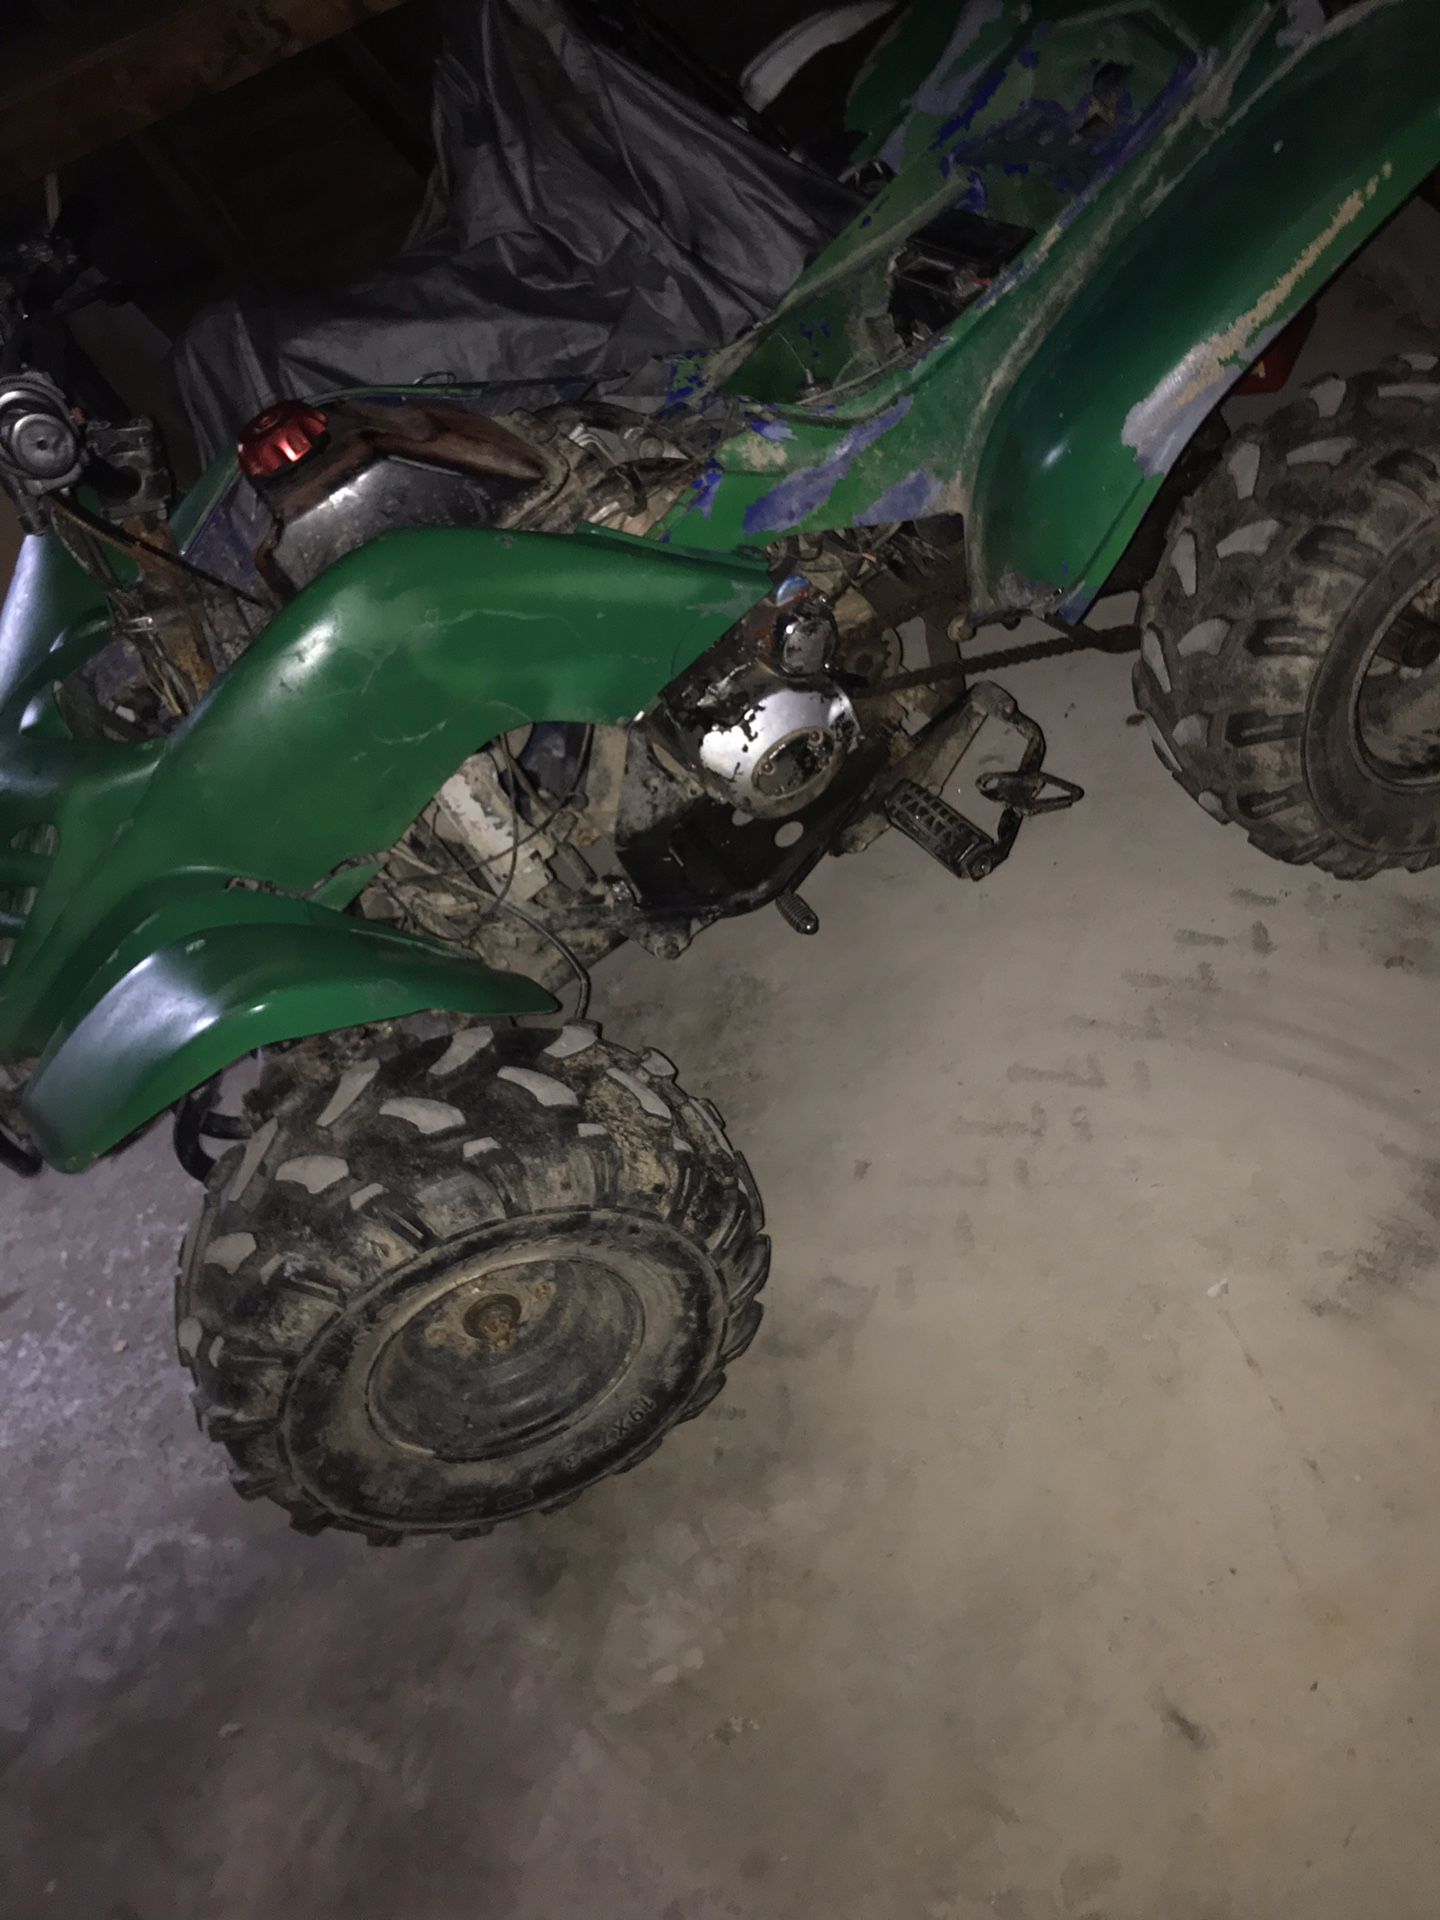 Atv Chinese 250 Nd a viper 125 both steal run trade or sell